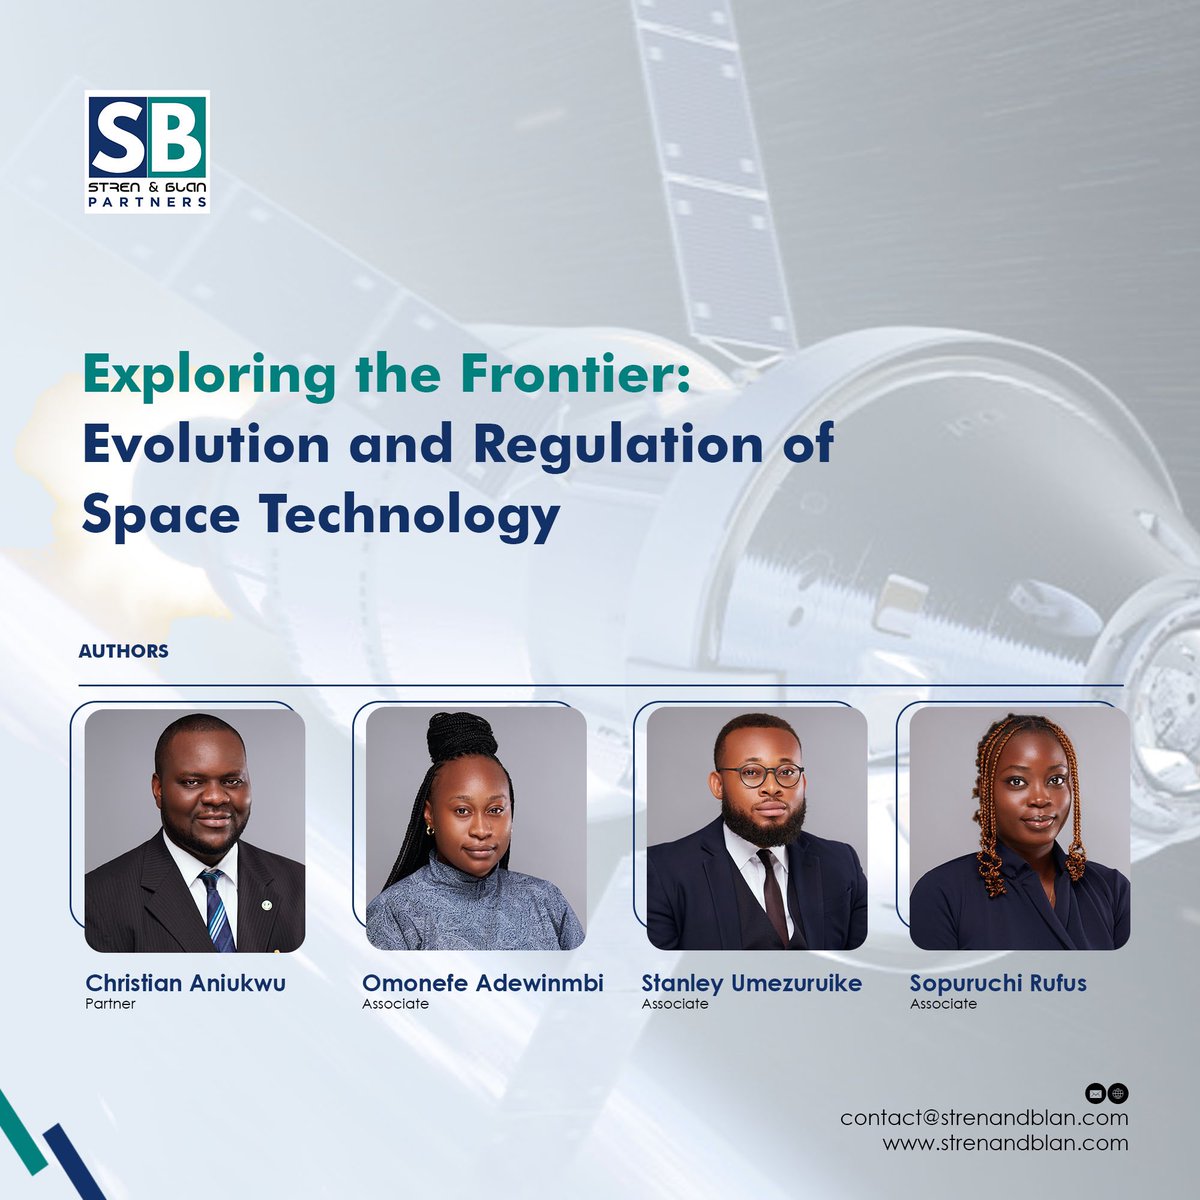 Space technology has long captivated the imagination of humanity, representing the ultimate frontier of exploration and innovation. From the early days of the Space Race to the present era of commercial space ventures, the evolution of space technology has been characterized by